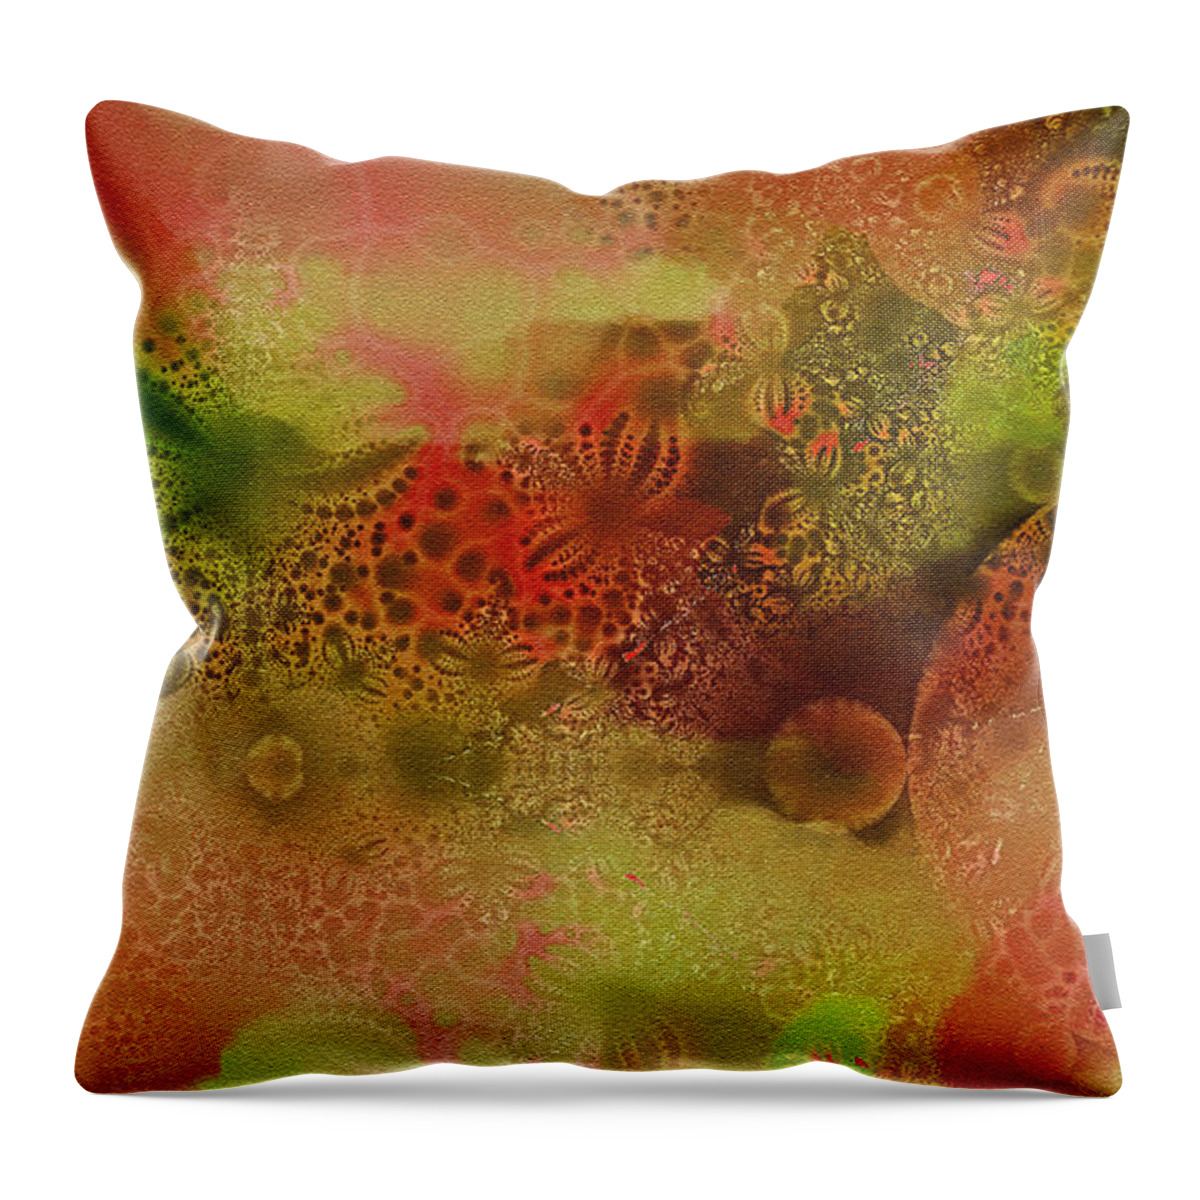 Abstract Throw Pillow featuring the digital art Textured Flowers and Bubbles by Geraldine DeBoer